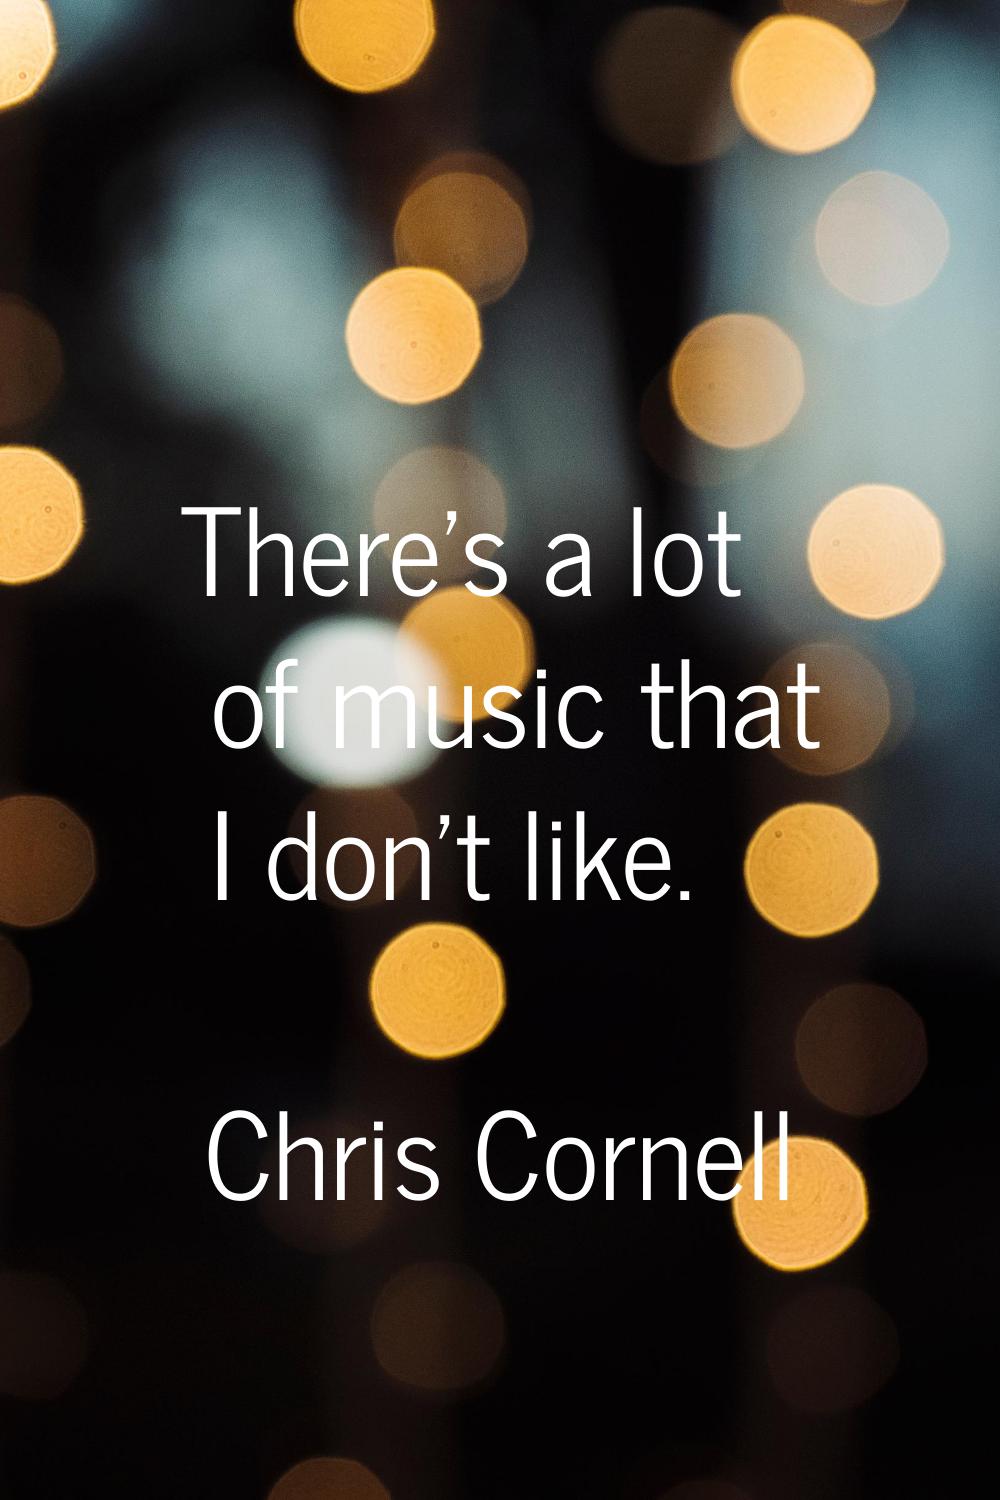 There's a lot of music that I don't like.